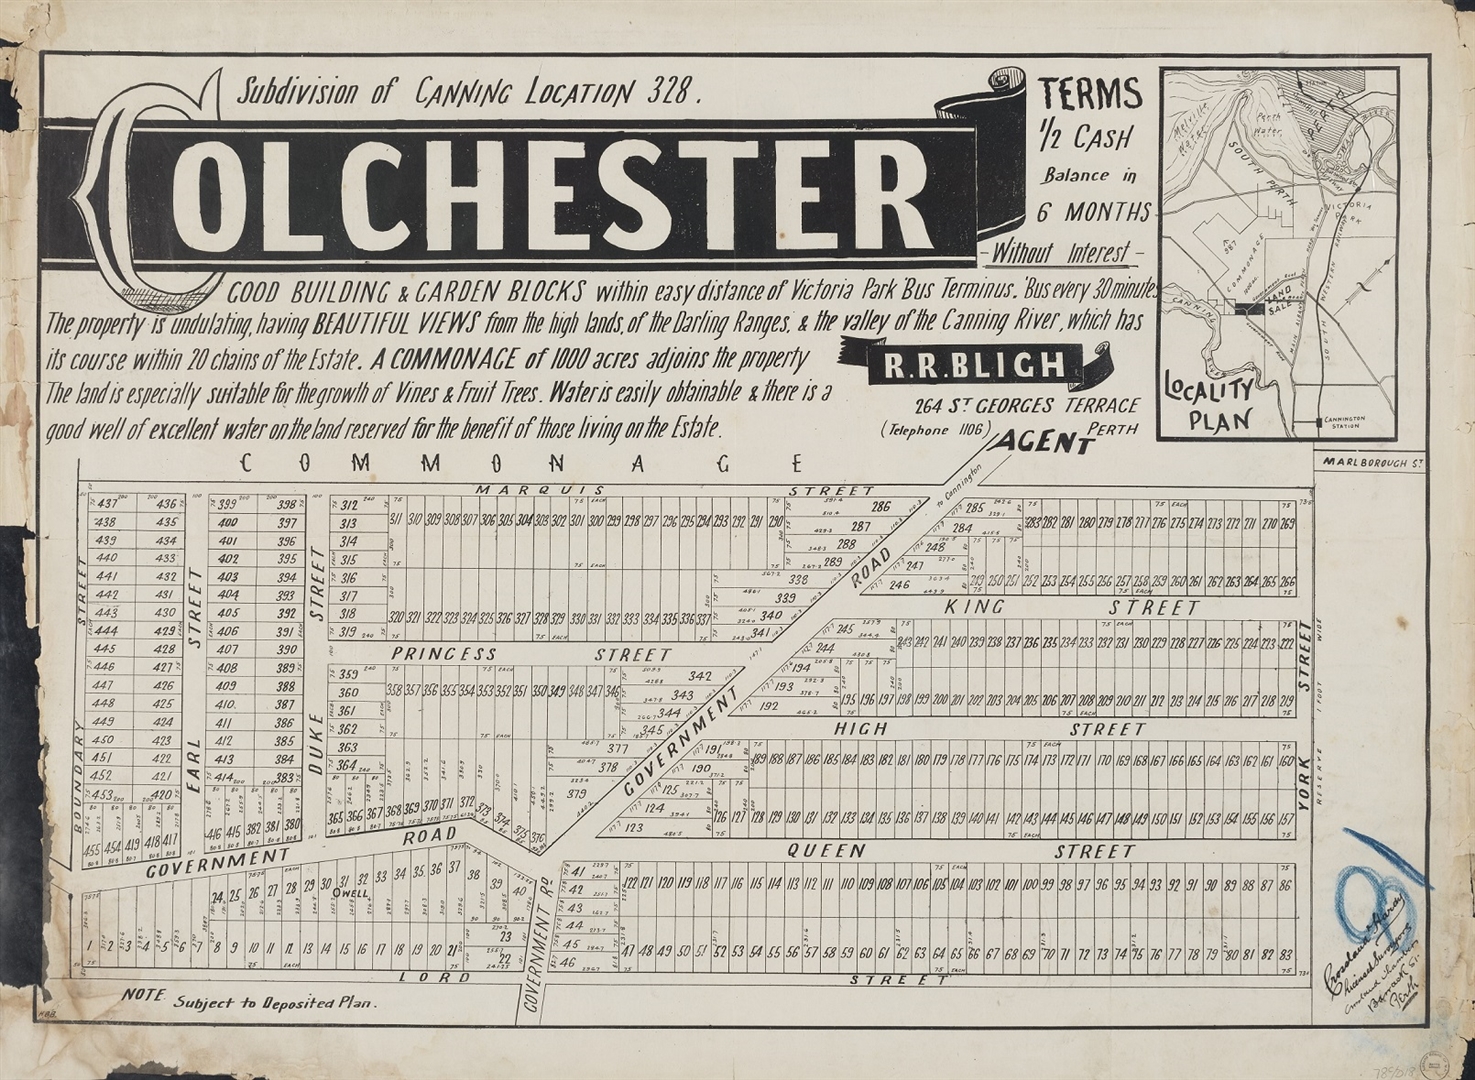 Colchester [1900?] Image